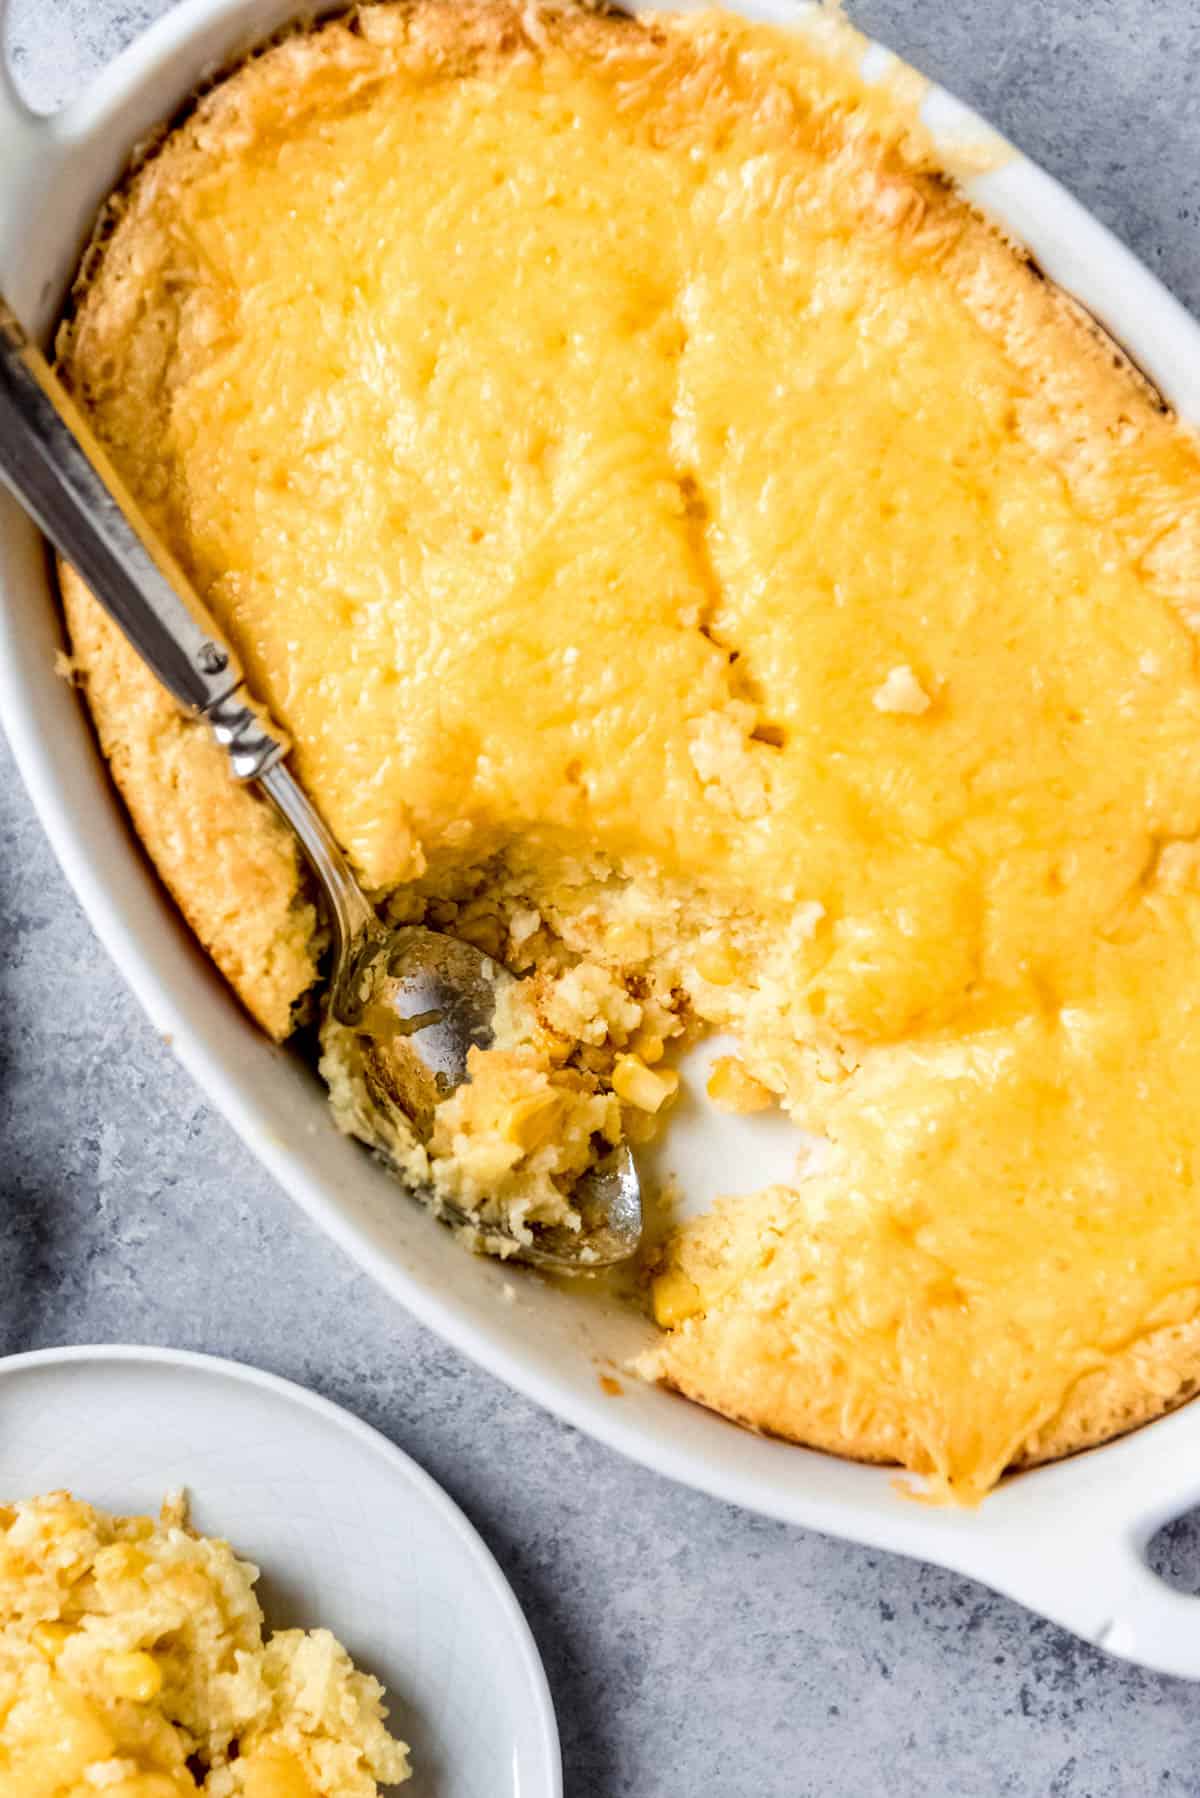 An image of corn spoon bread with a scoop taken out of it.